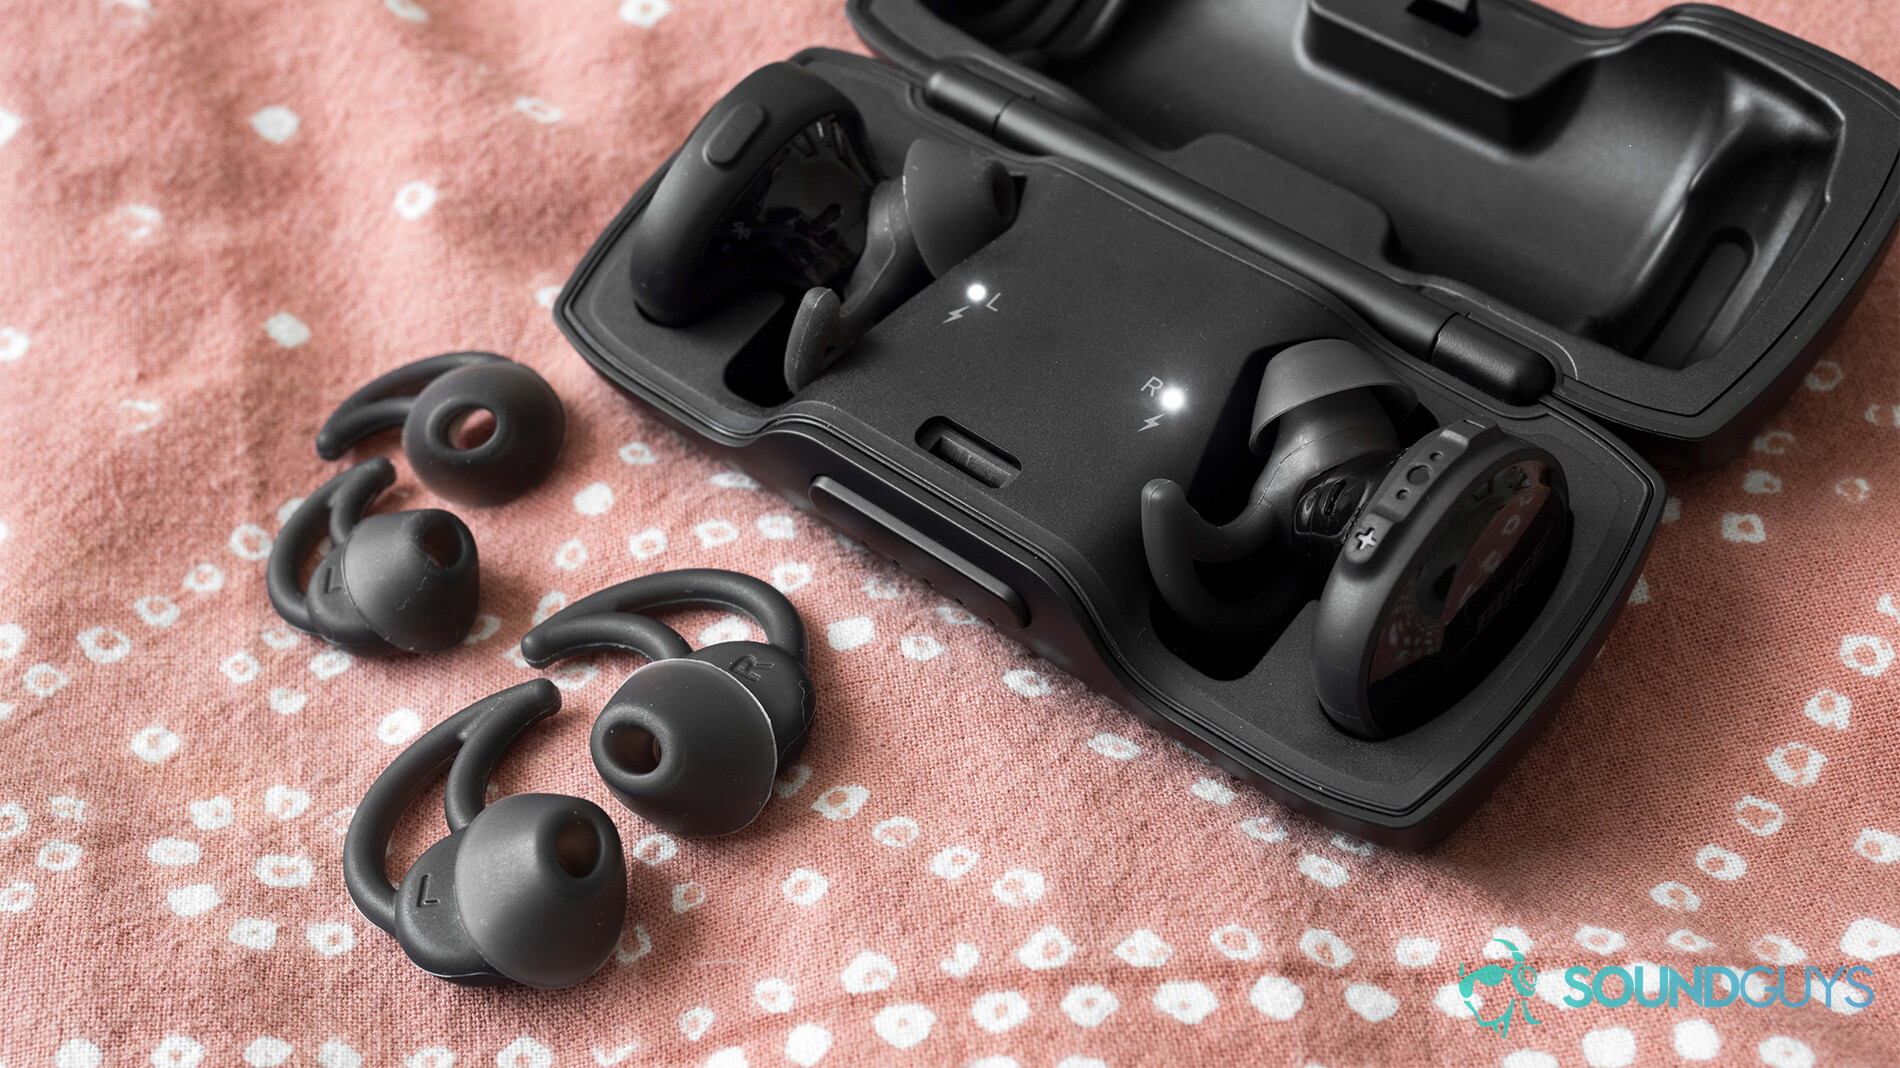 The Bose SoundSport Free in the case with the extra StayHear+ ear tips on a pink comforter.